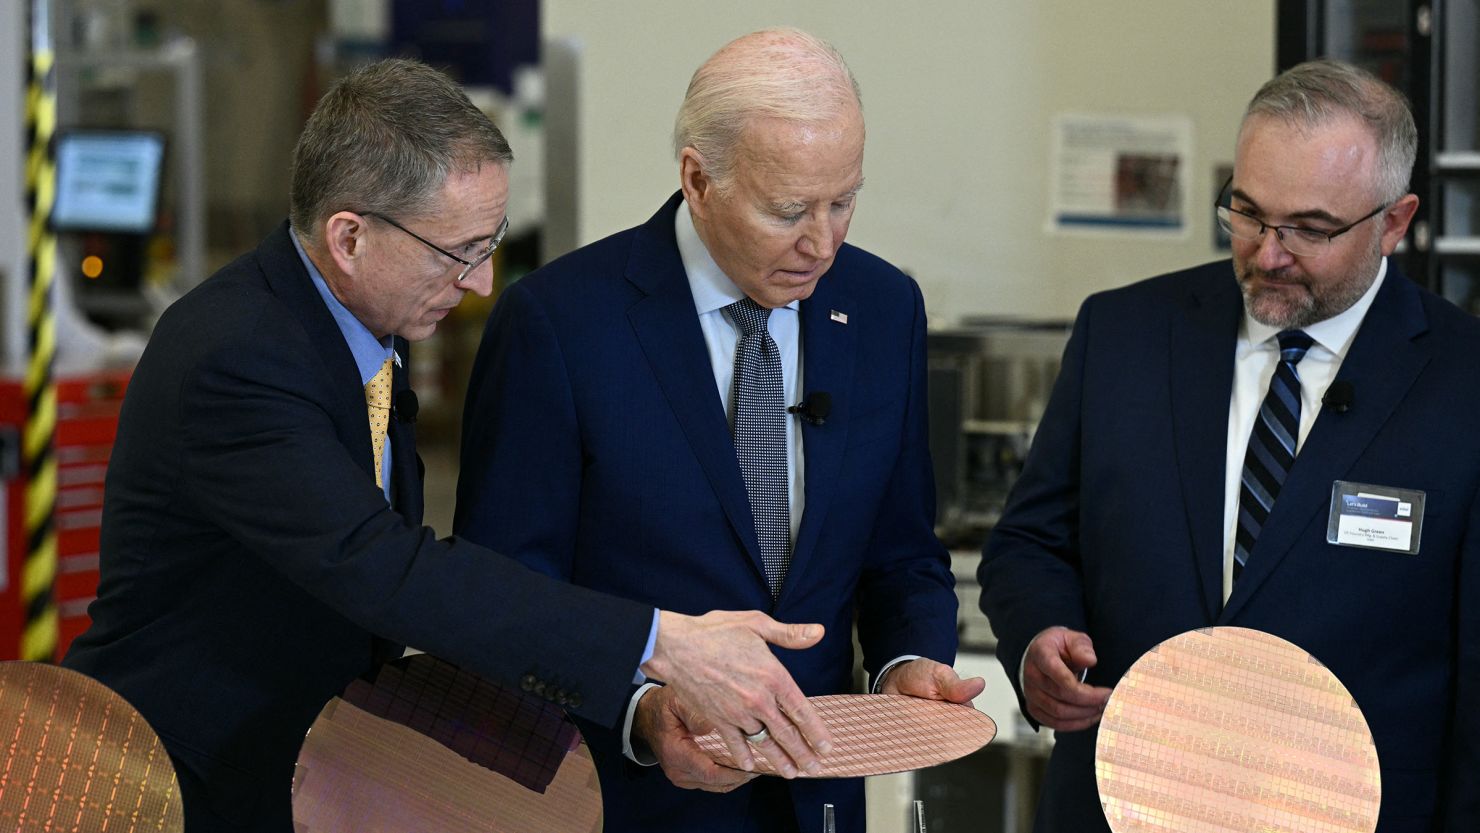 Biden Administration Commits $8.5 Billion to Boost Intel's Chip Production Across Four States